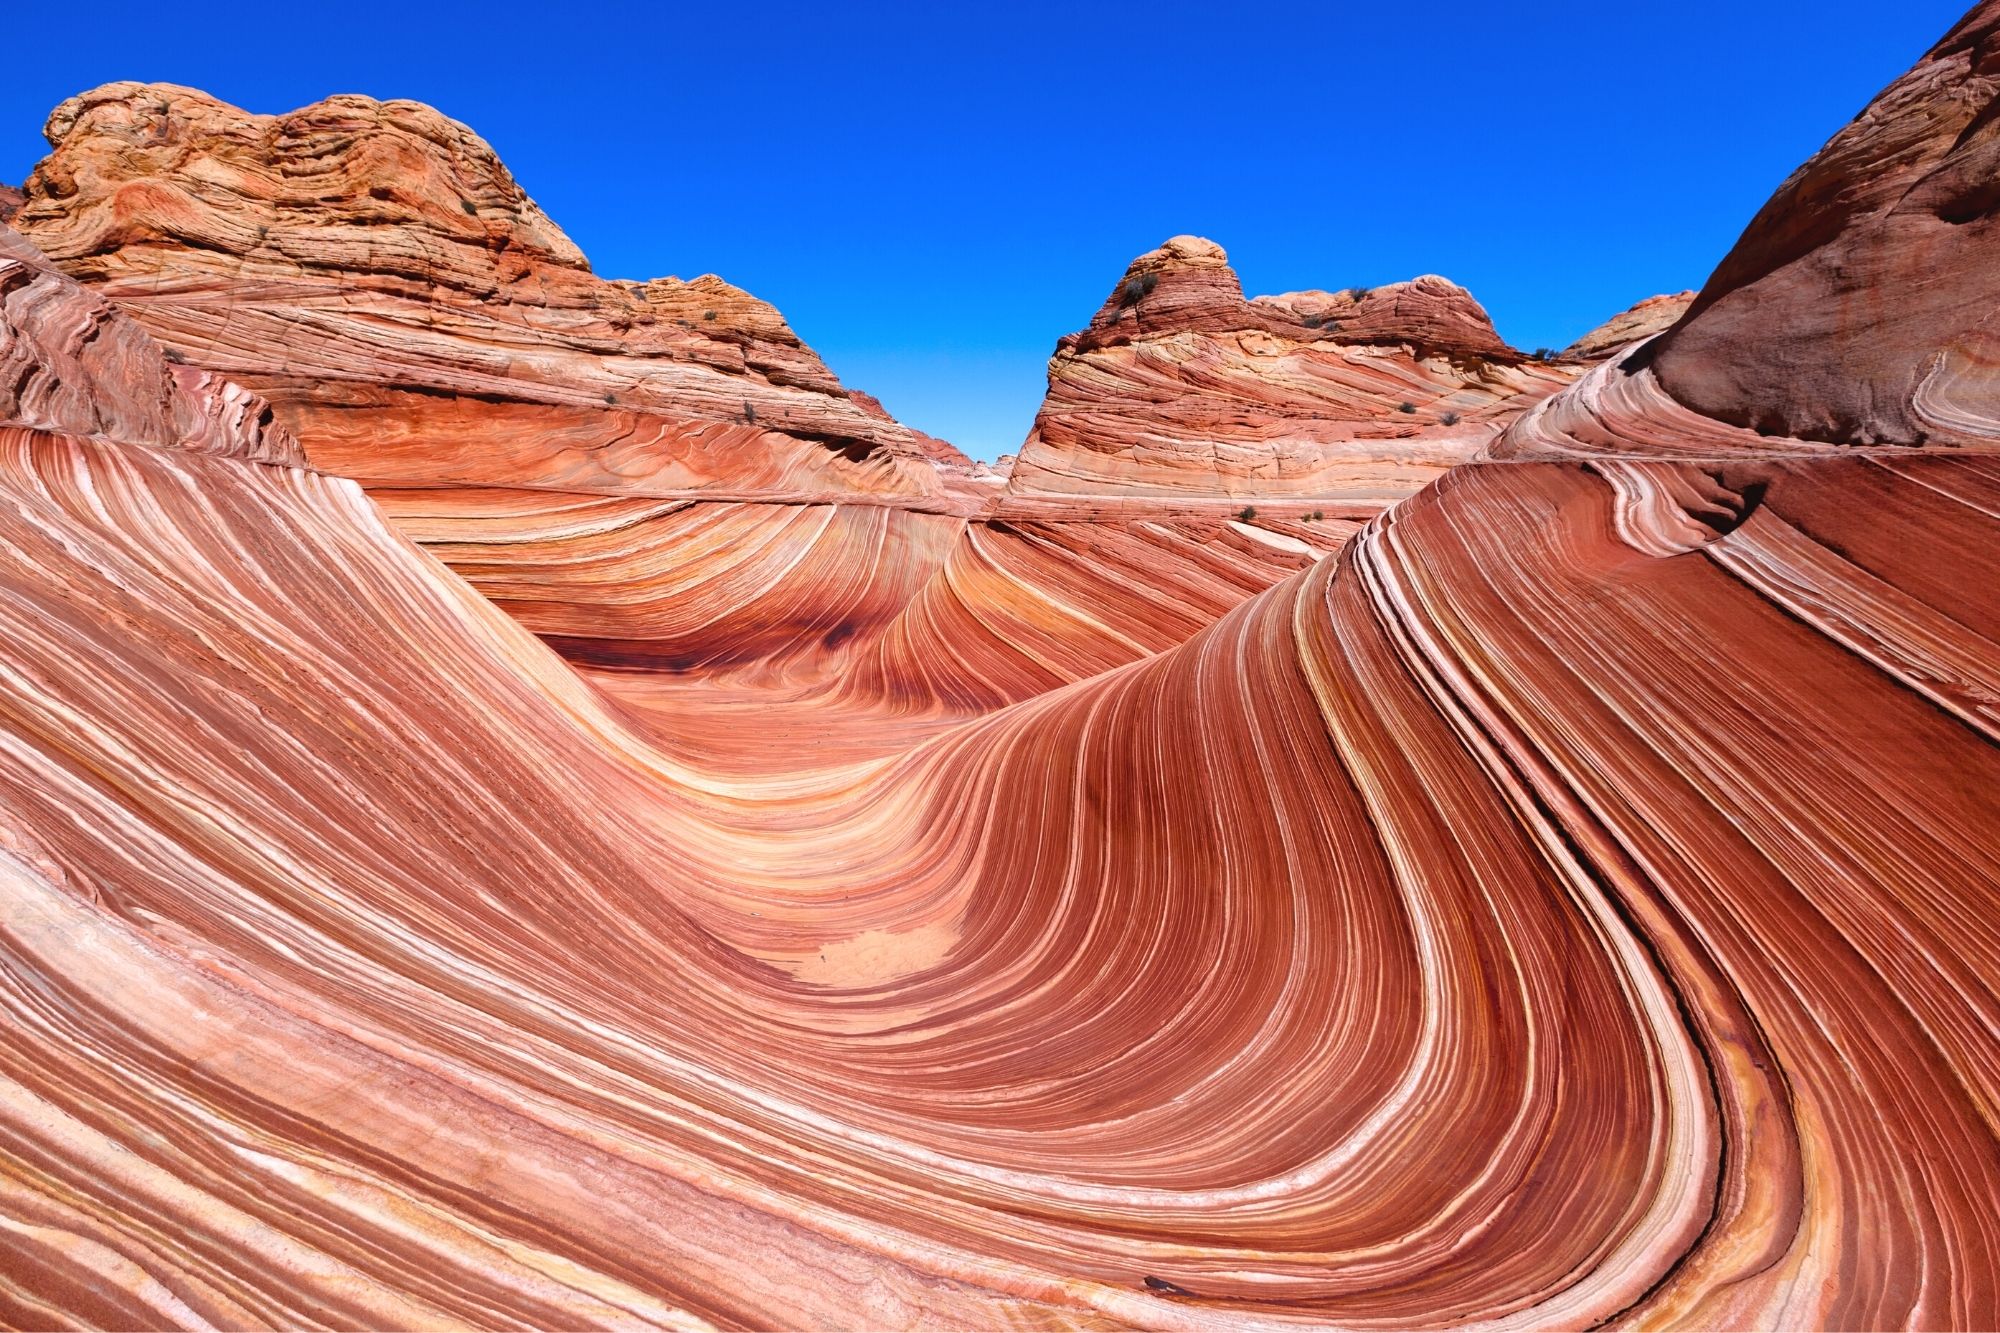 The Wave rock formation